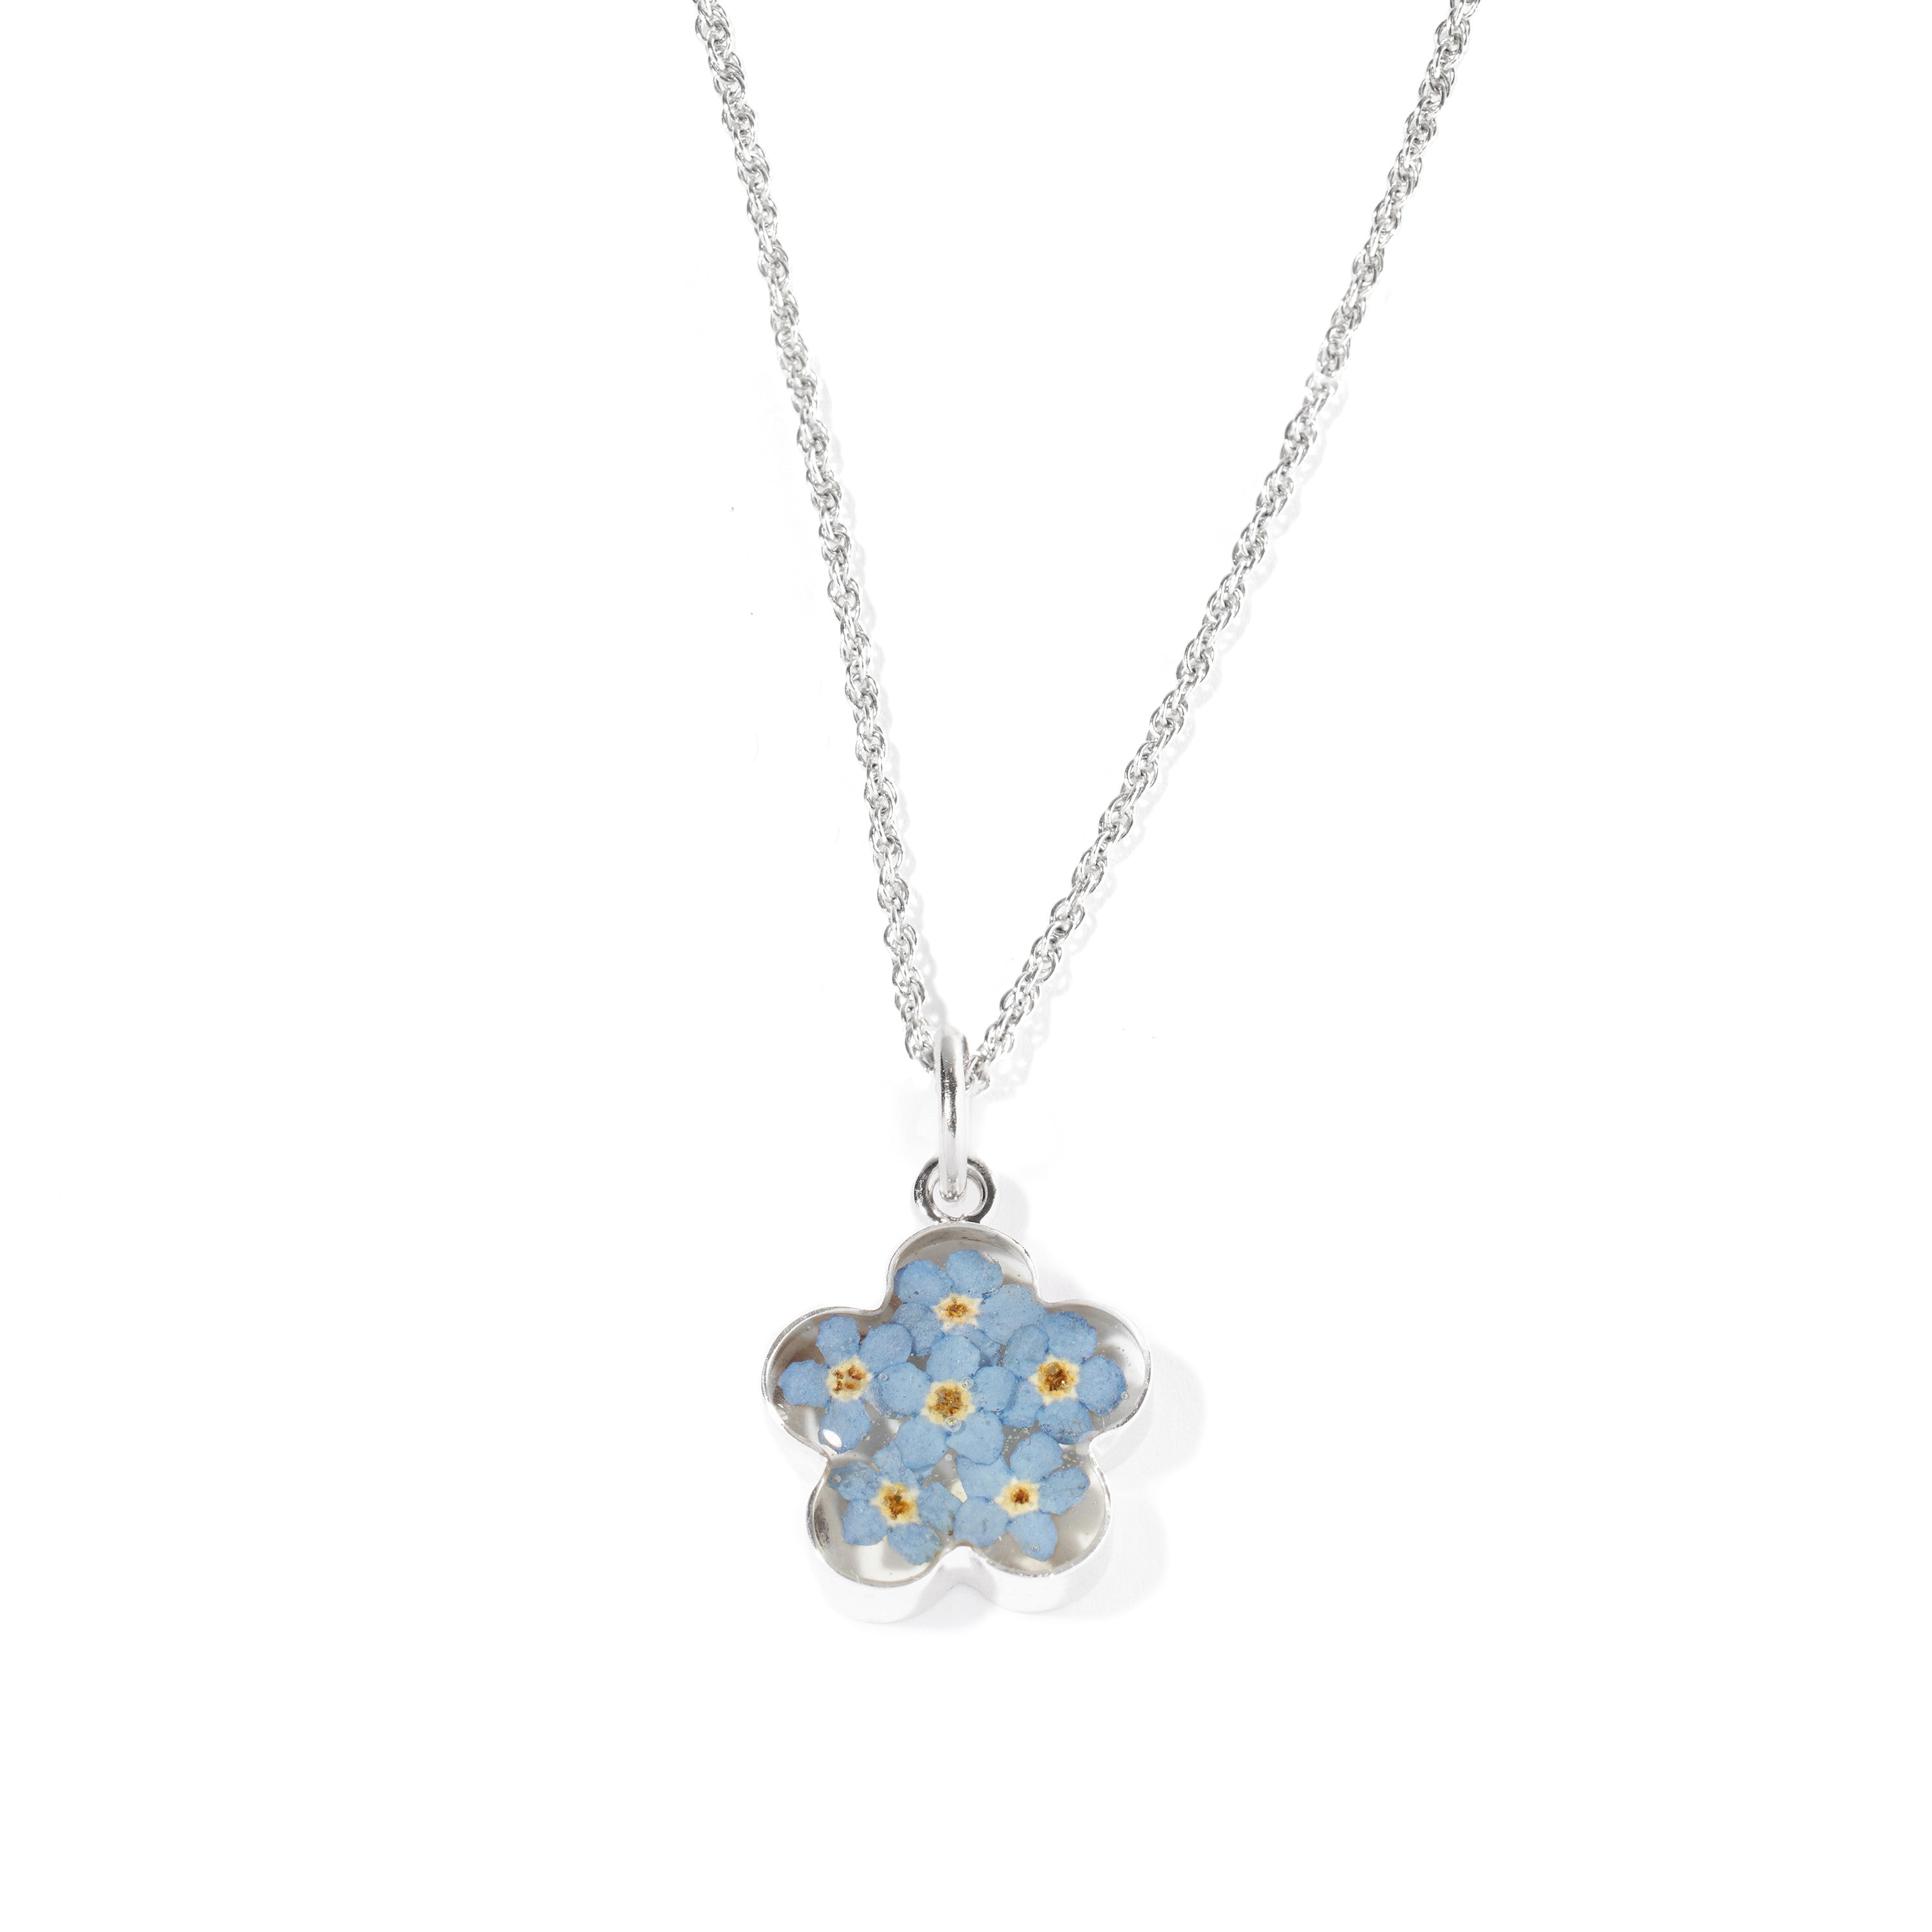 Dira Necklace with Forget-Me-Not Flowers